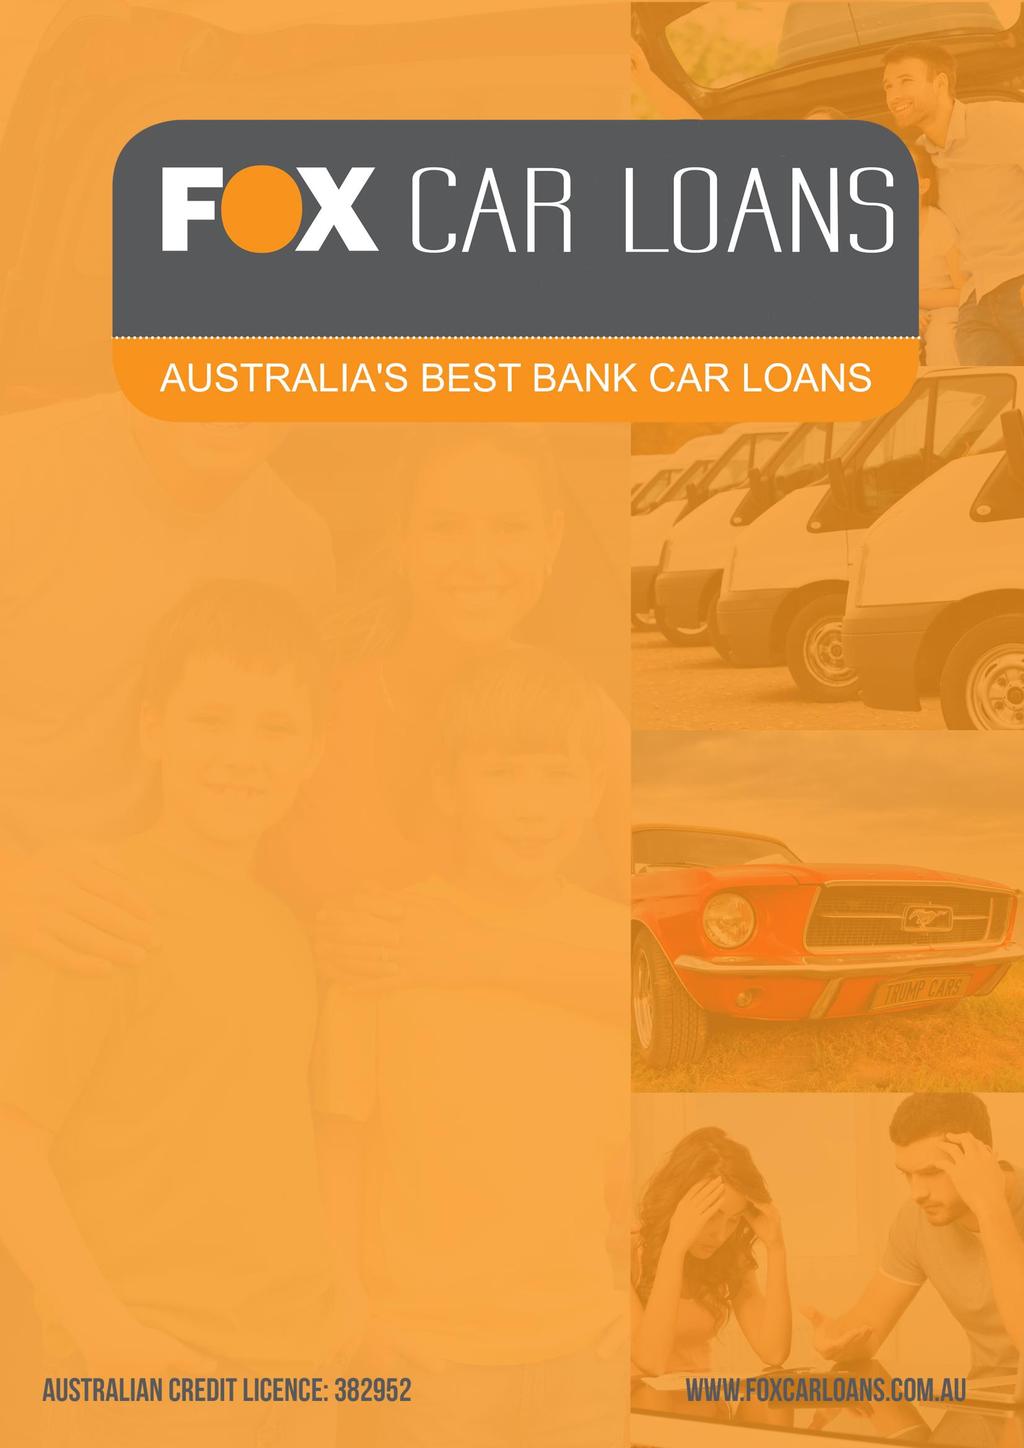 2014 Fox Car Loans The copyright on the material in this e-book is owned by Fox Car Loans and is protected by international copyright legislation.